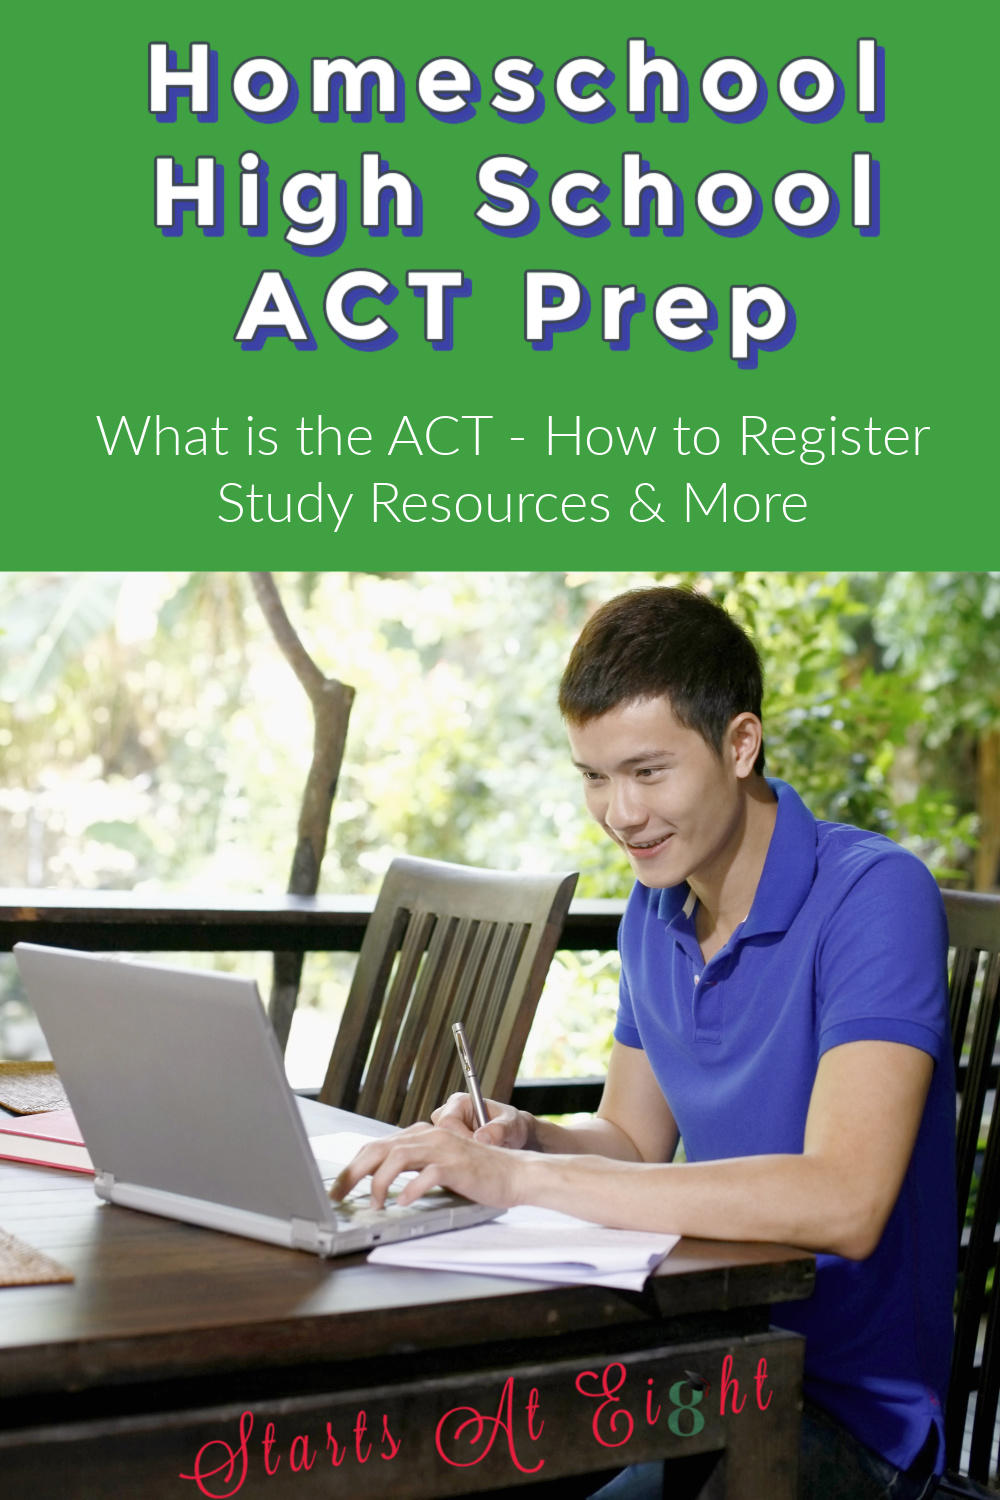 Homeschool High School ACT Prep includes information on scheduling and taking as well as resources for studying for the ACT.